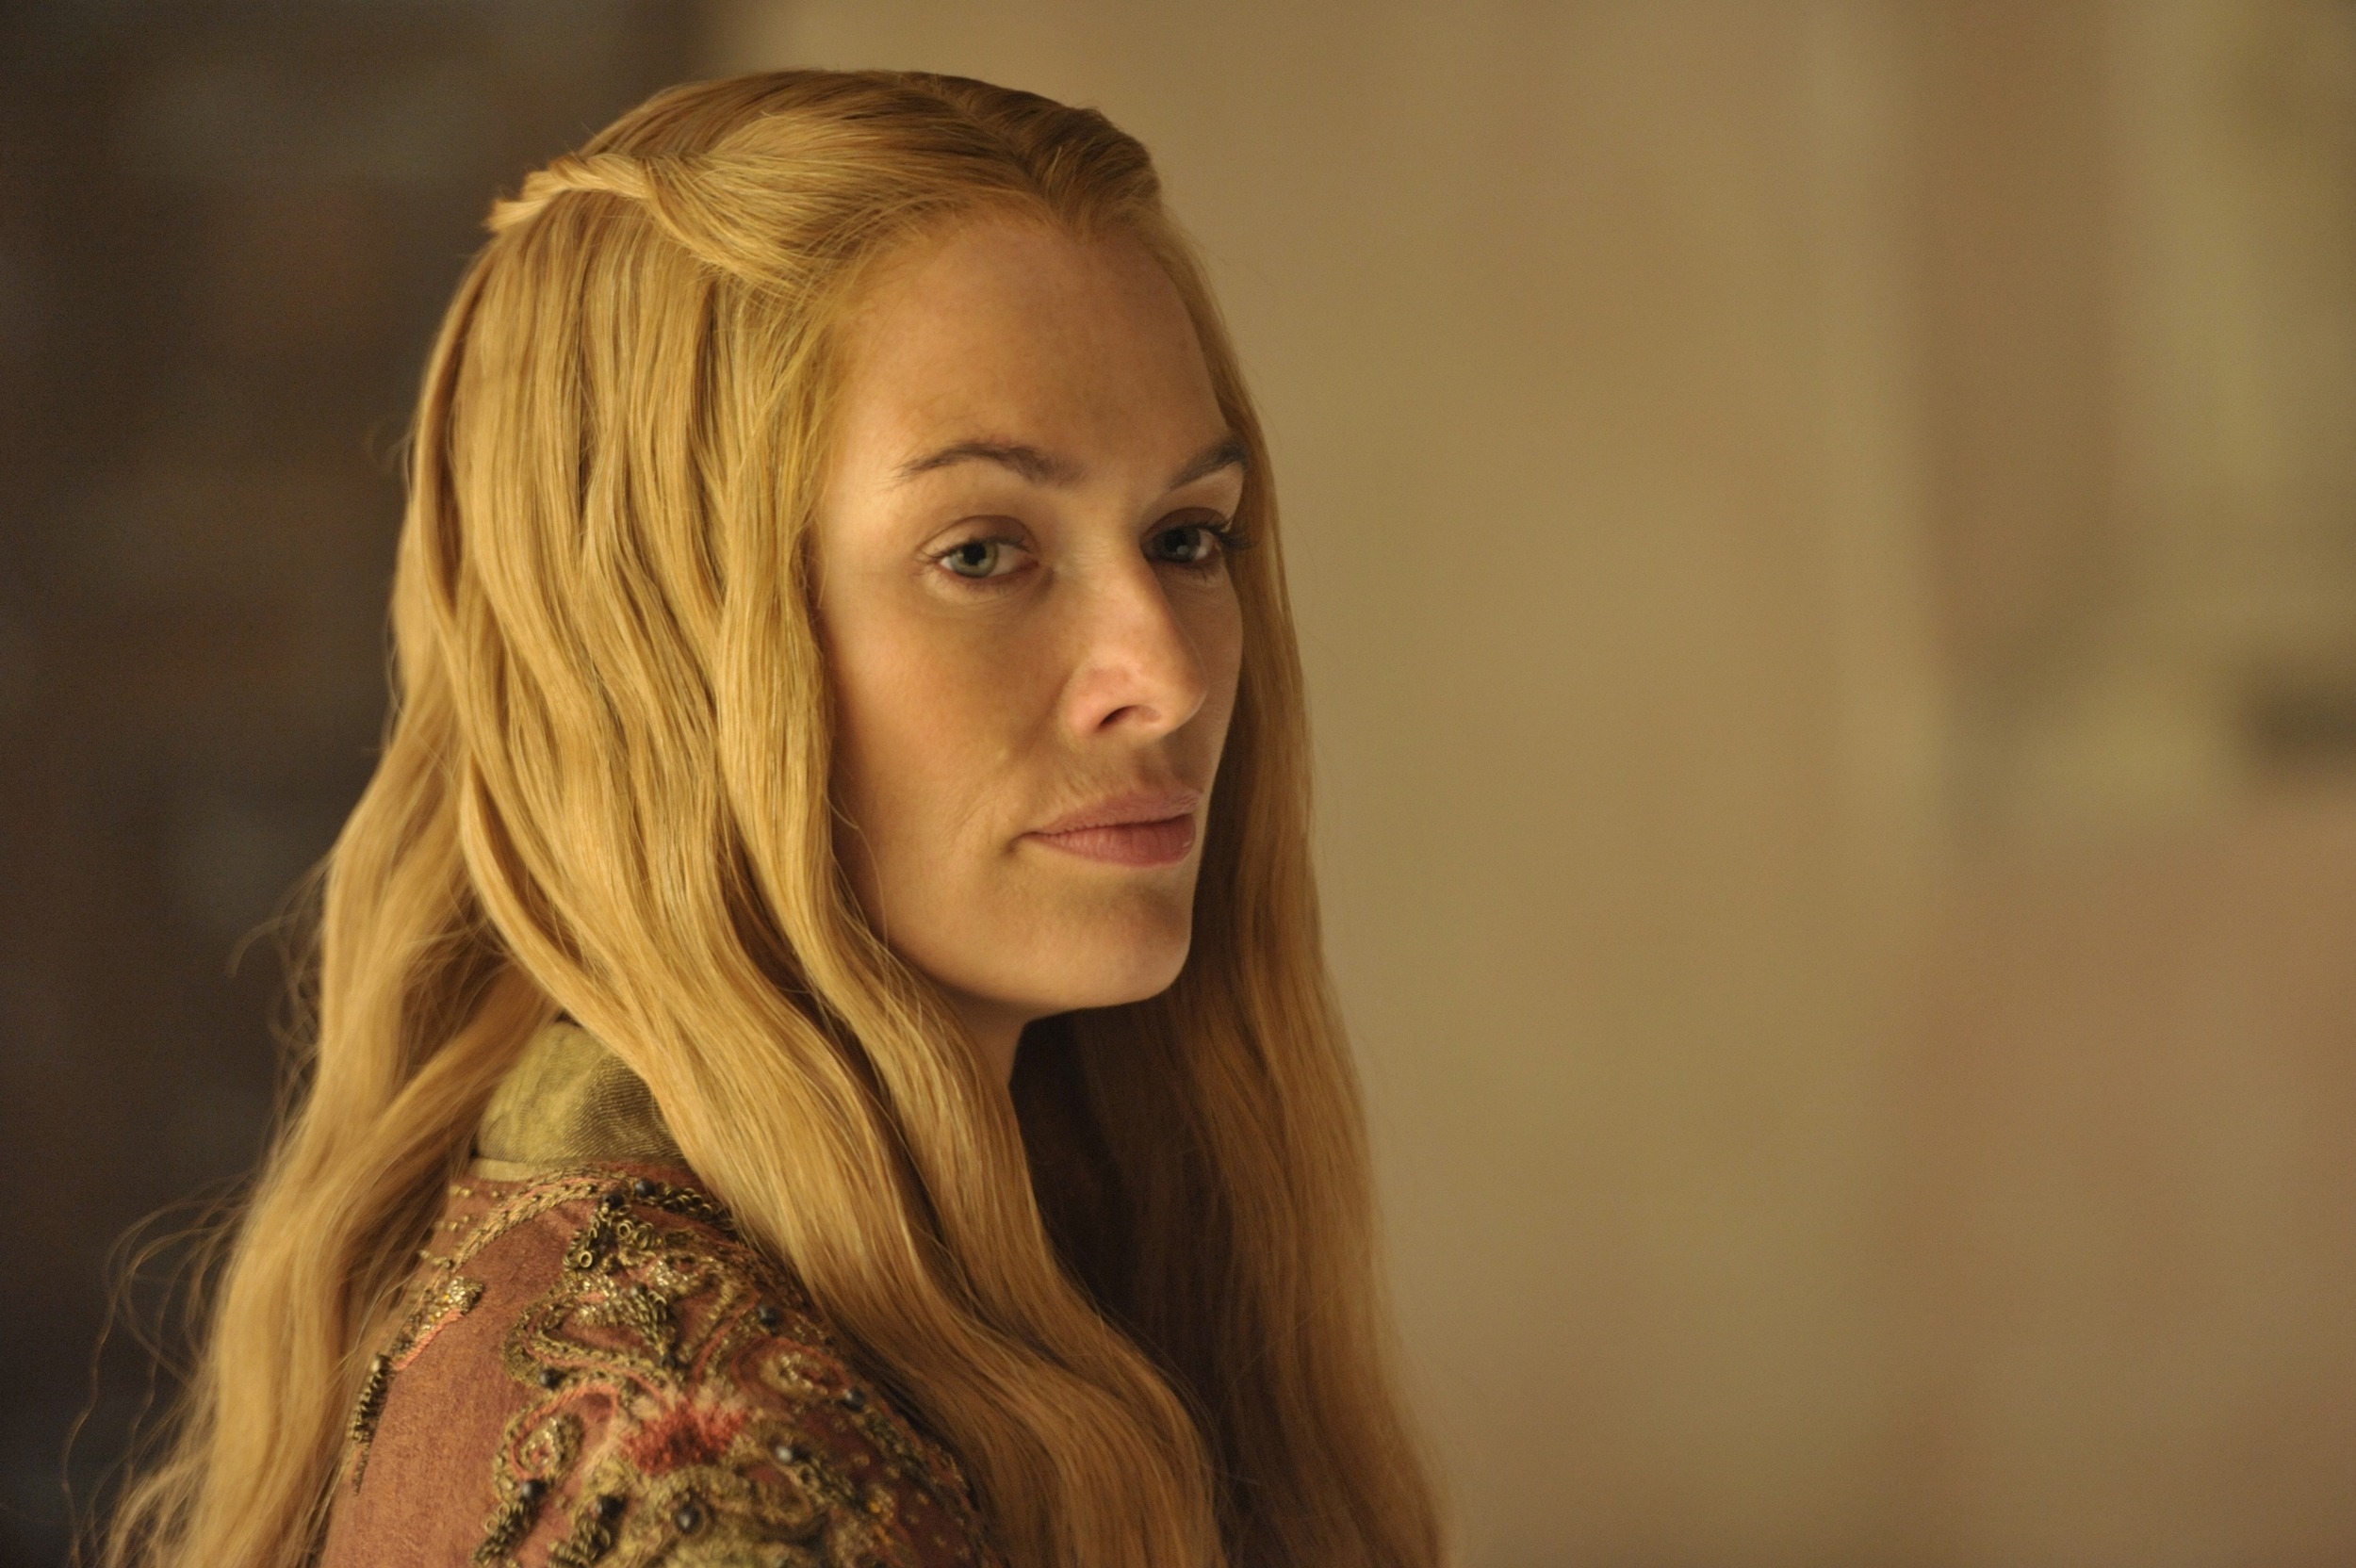 190+ Cersei Lannister HD Wallpapers and Backgrounds